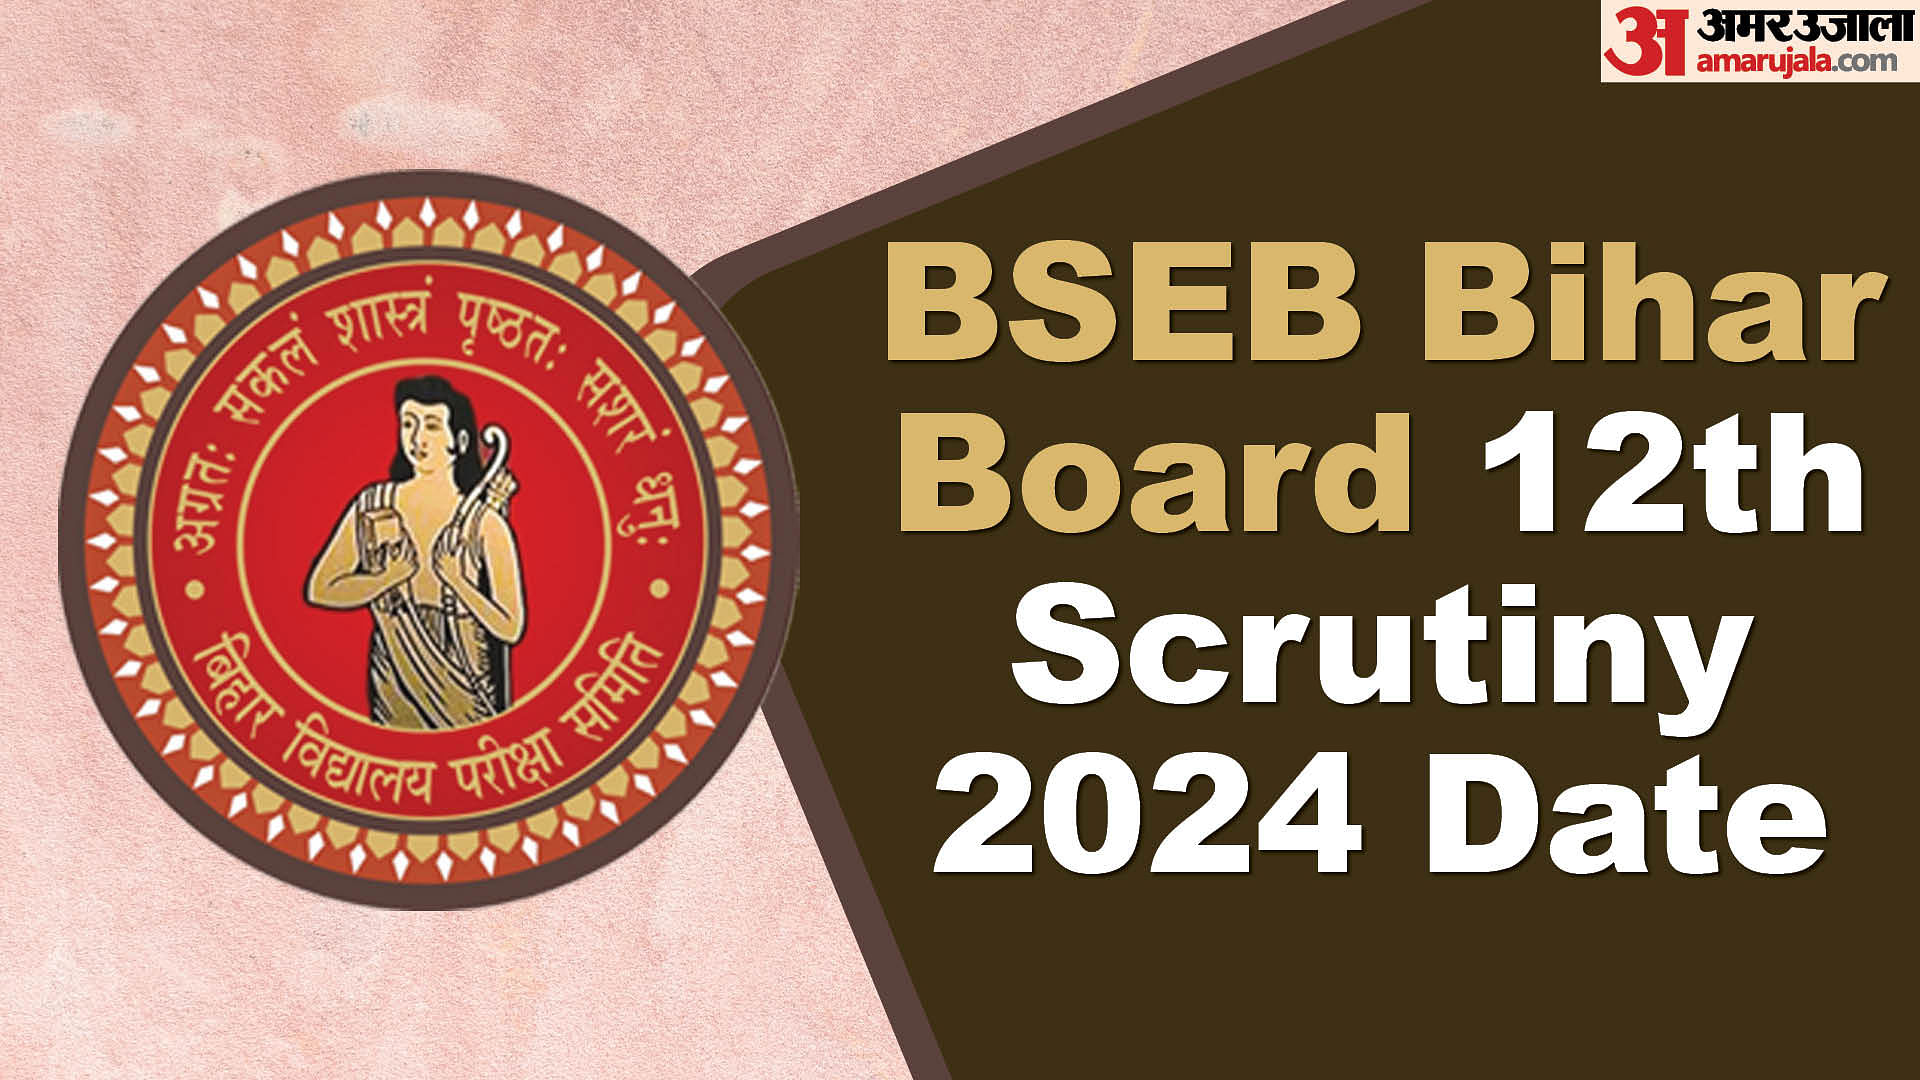 BSEB Bihar Board 12th Scrutiny 2024 Date, check how to apply here